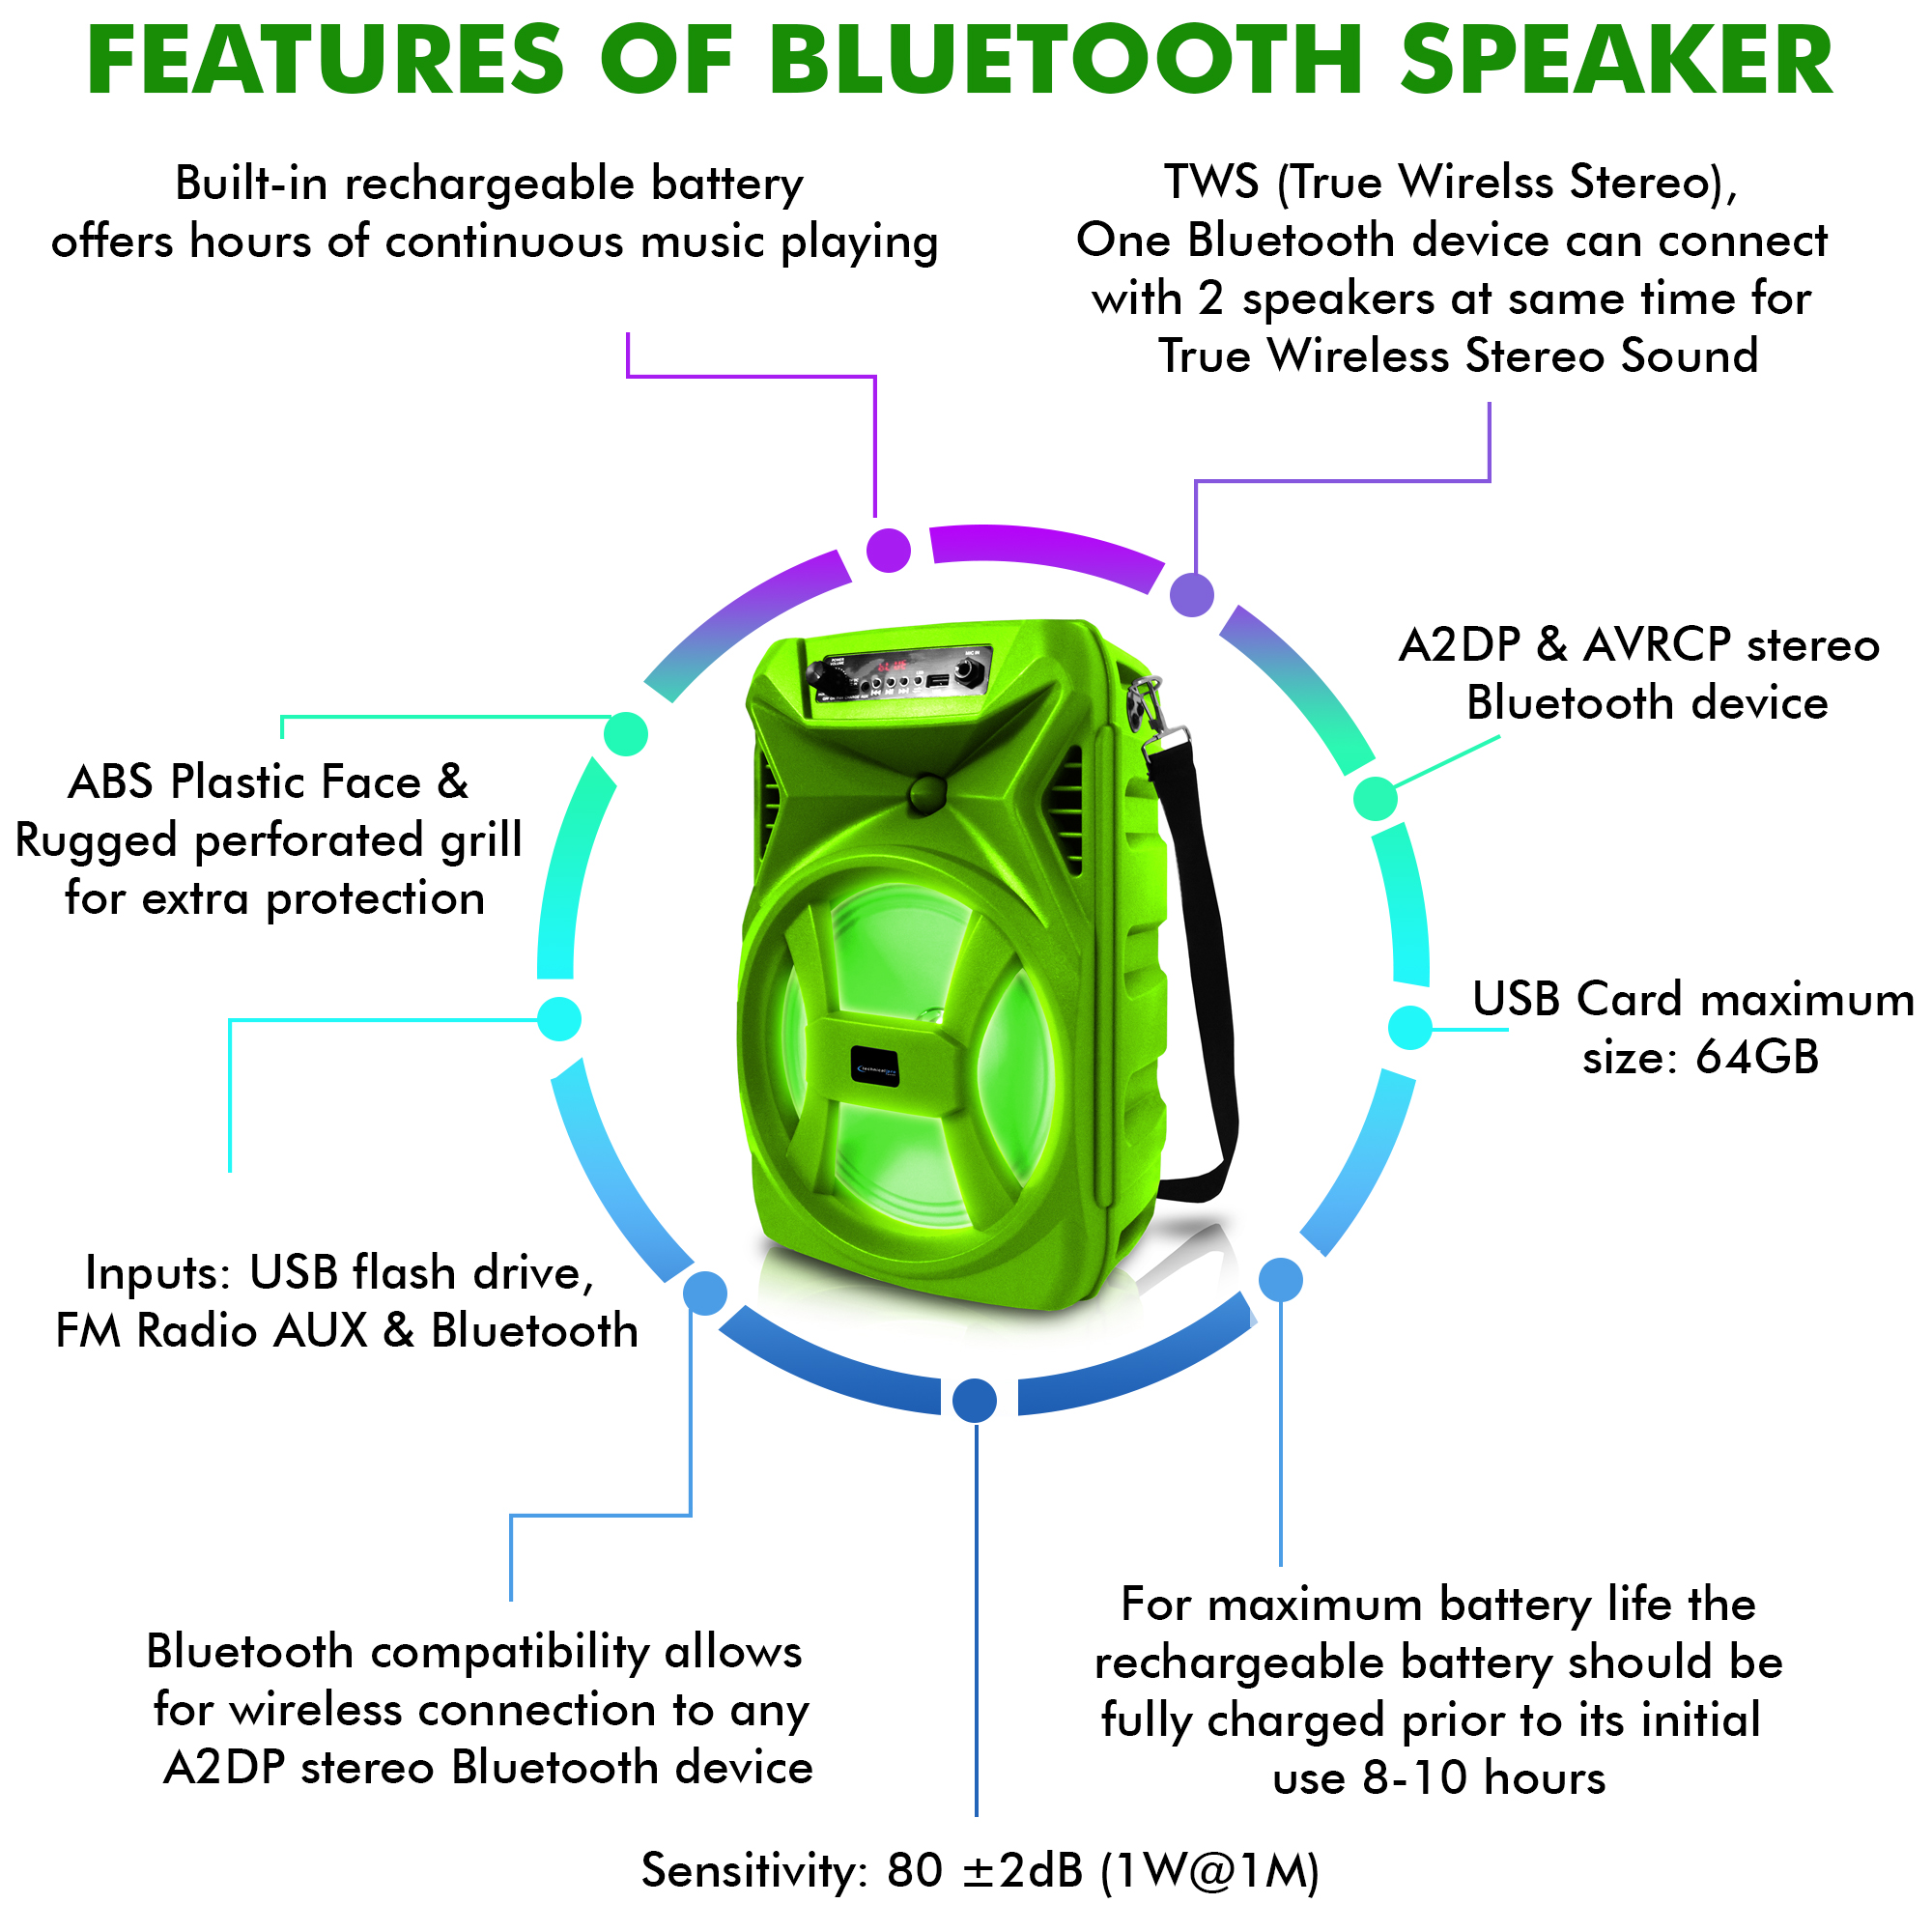 (2 Qty) Technical Pro 8" Portable 500 Watts Bluetooth Speaker w/ Woofer and Tweeter, PA LED Speaker, USB Card Input, - image 3 of 7